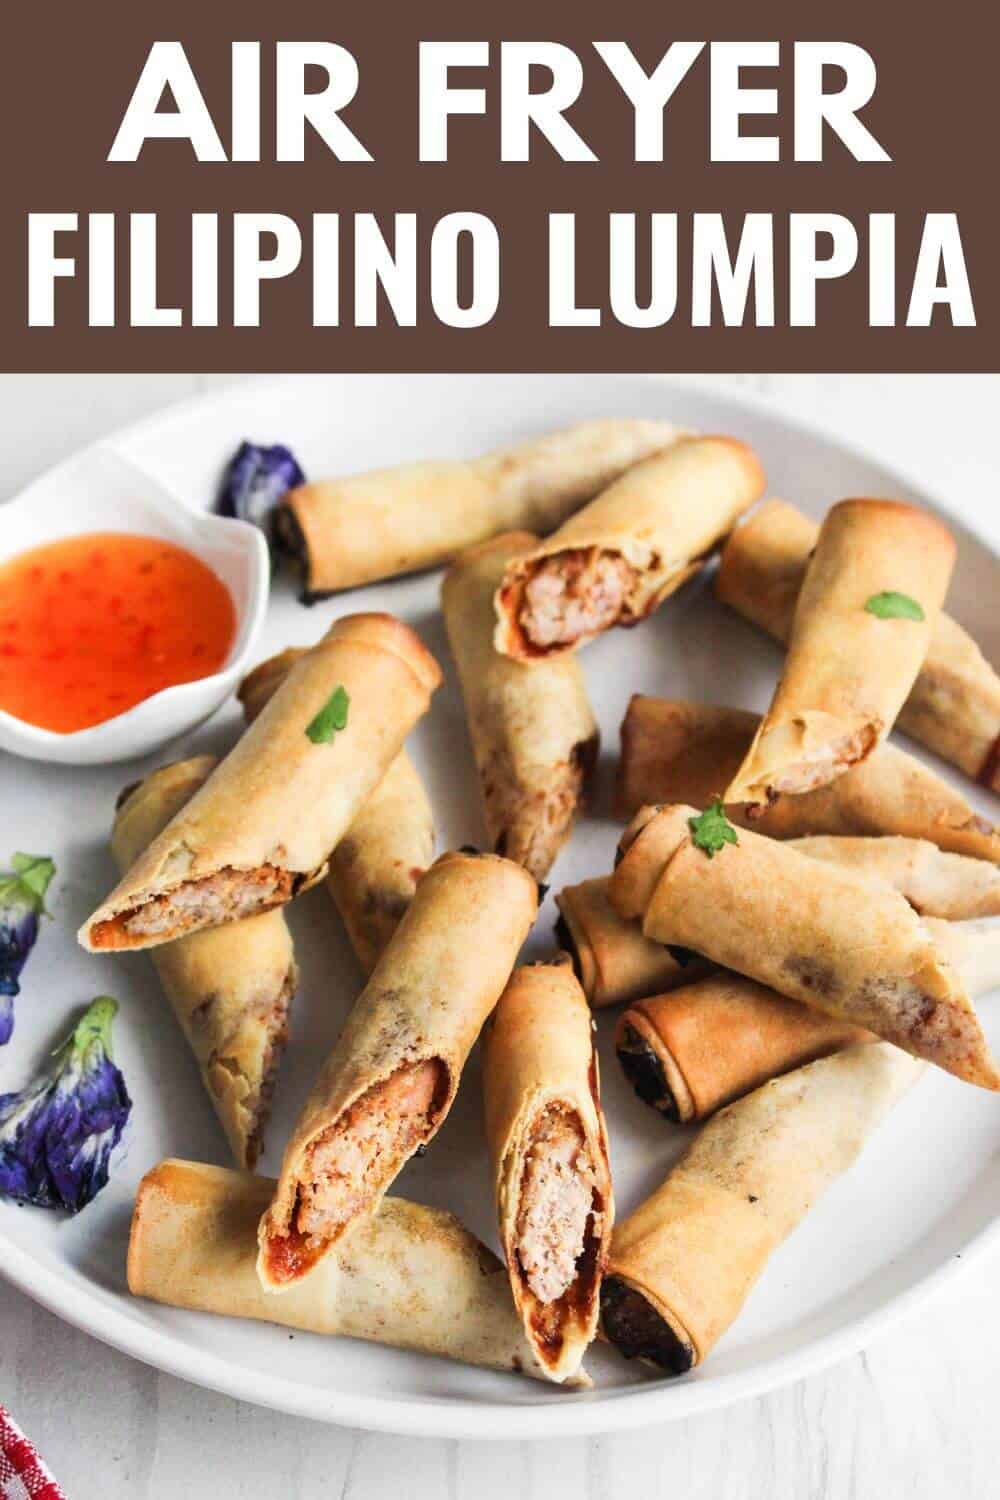 Air fryer filipino lumpia on a plate.